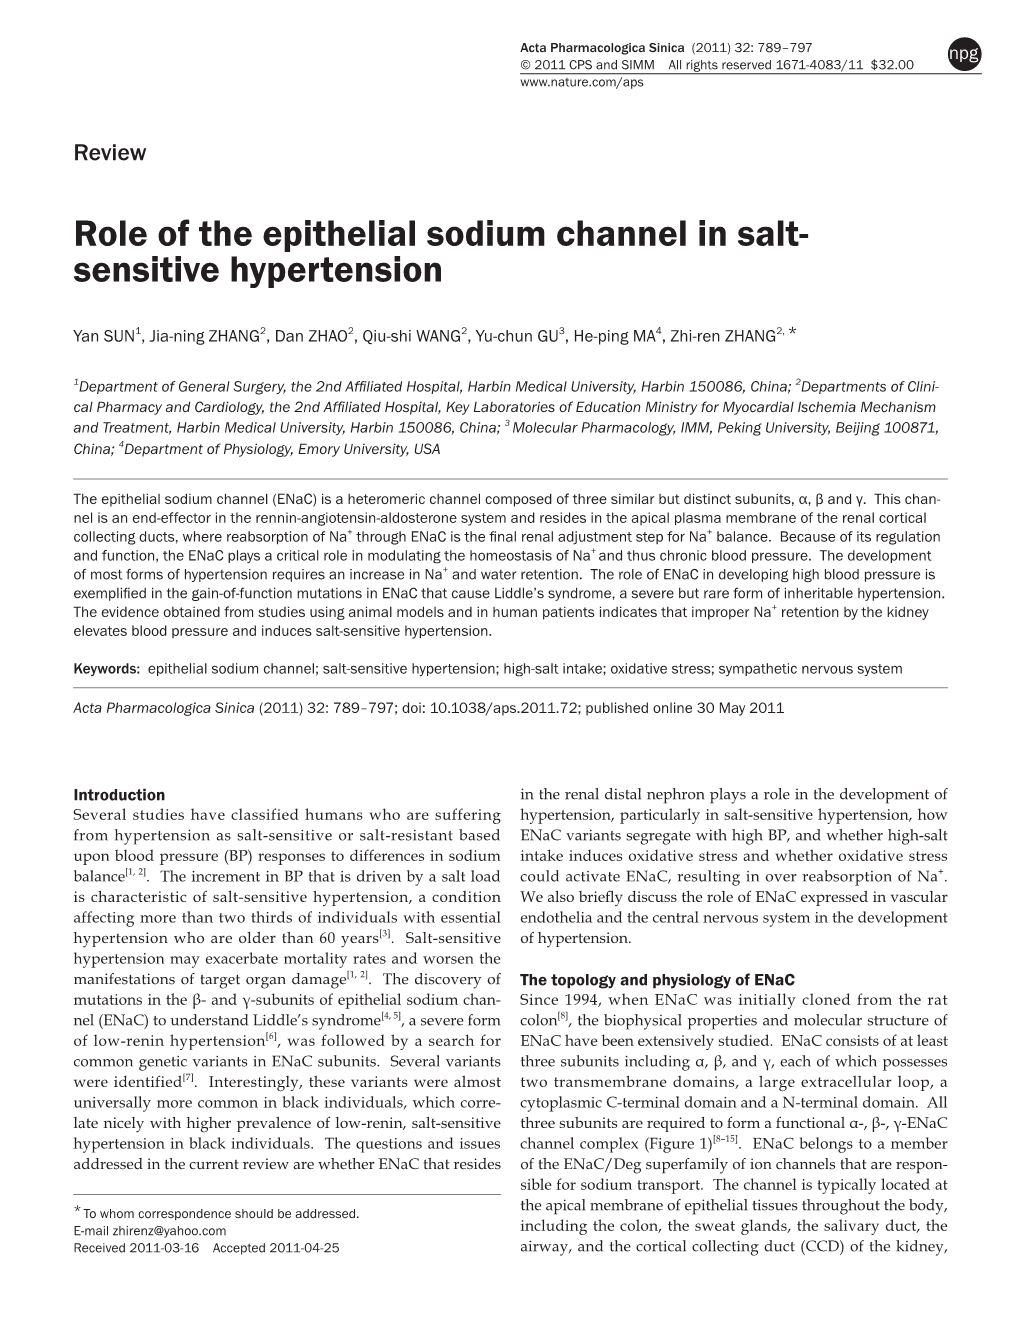 Role of the Epithelial Sodium Channel in Salt-Sensitive Hypertension